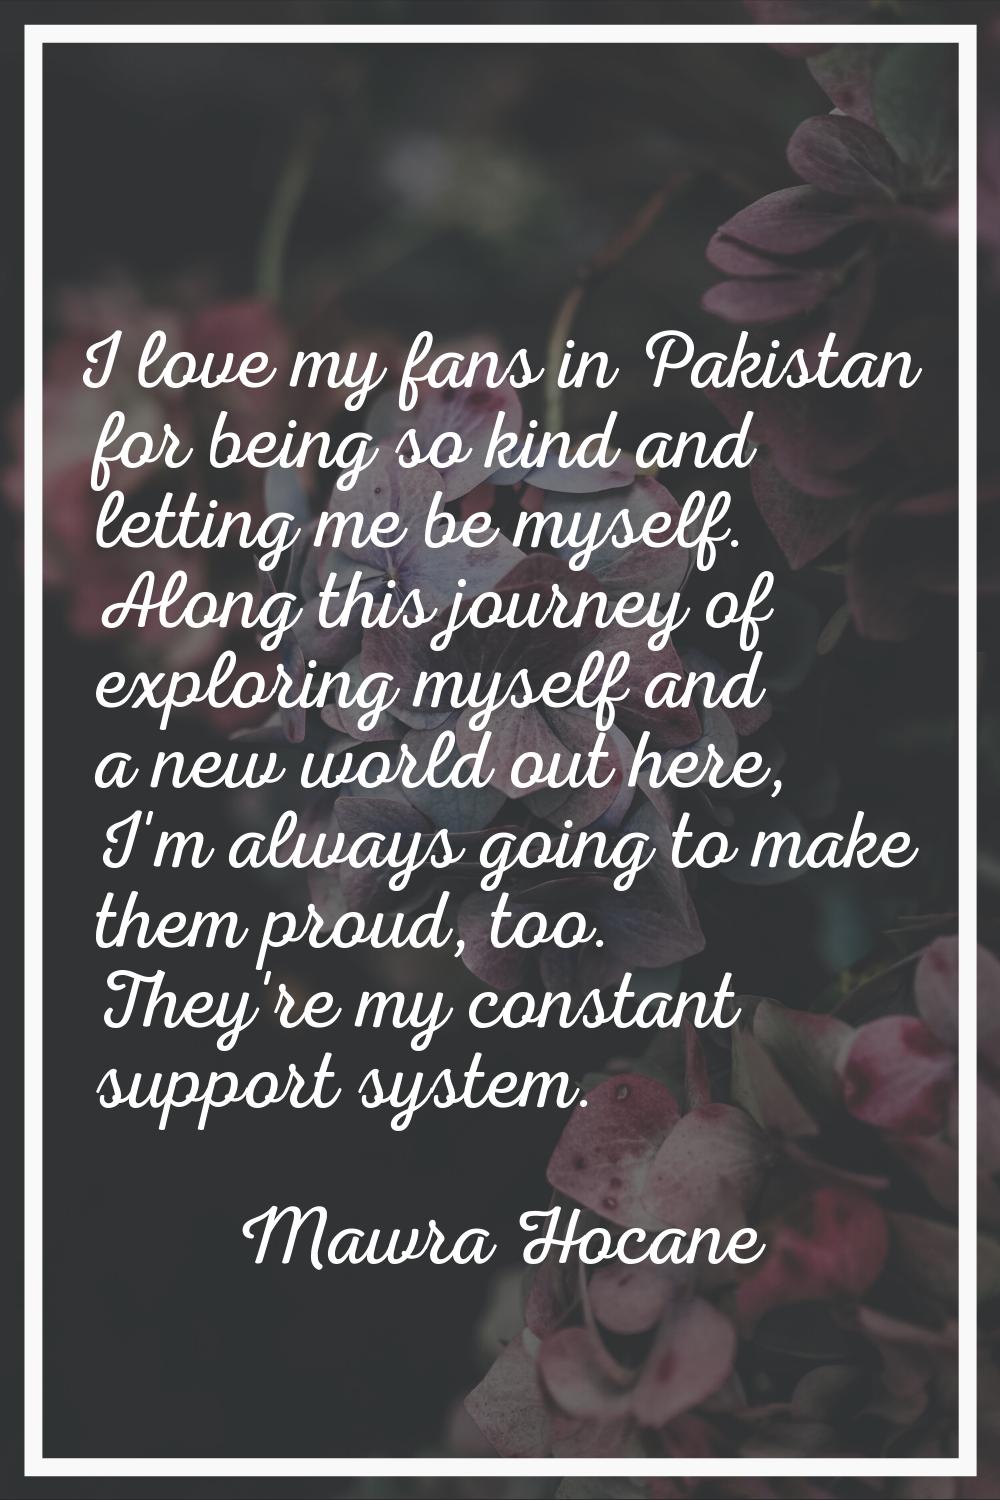 I love my fans in Pakistan for being so kind and letting me be myself. Along this journey of explor